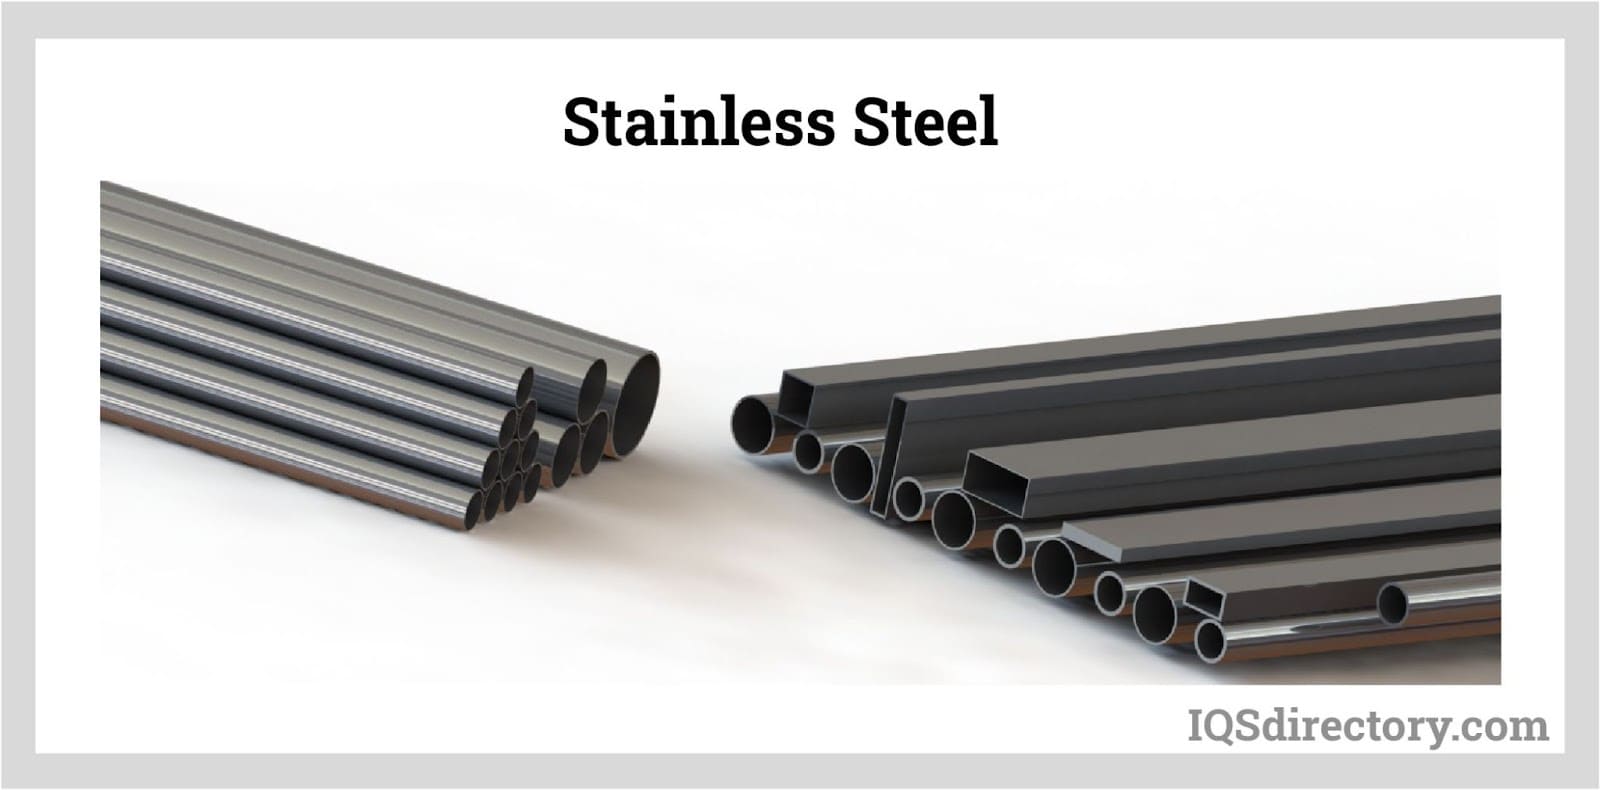 More Stainless Steel Manufacturer Listings